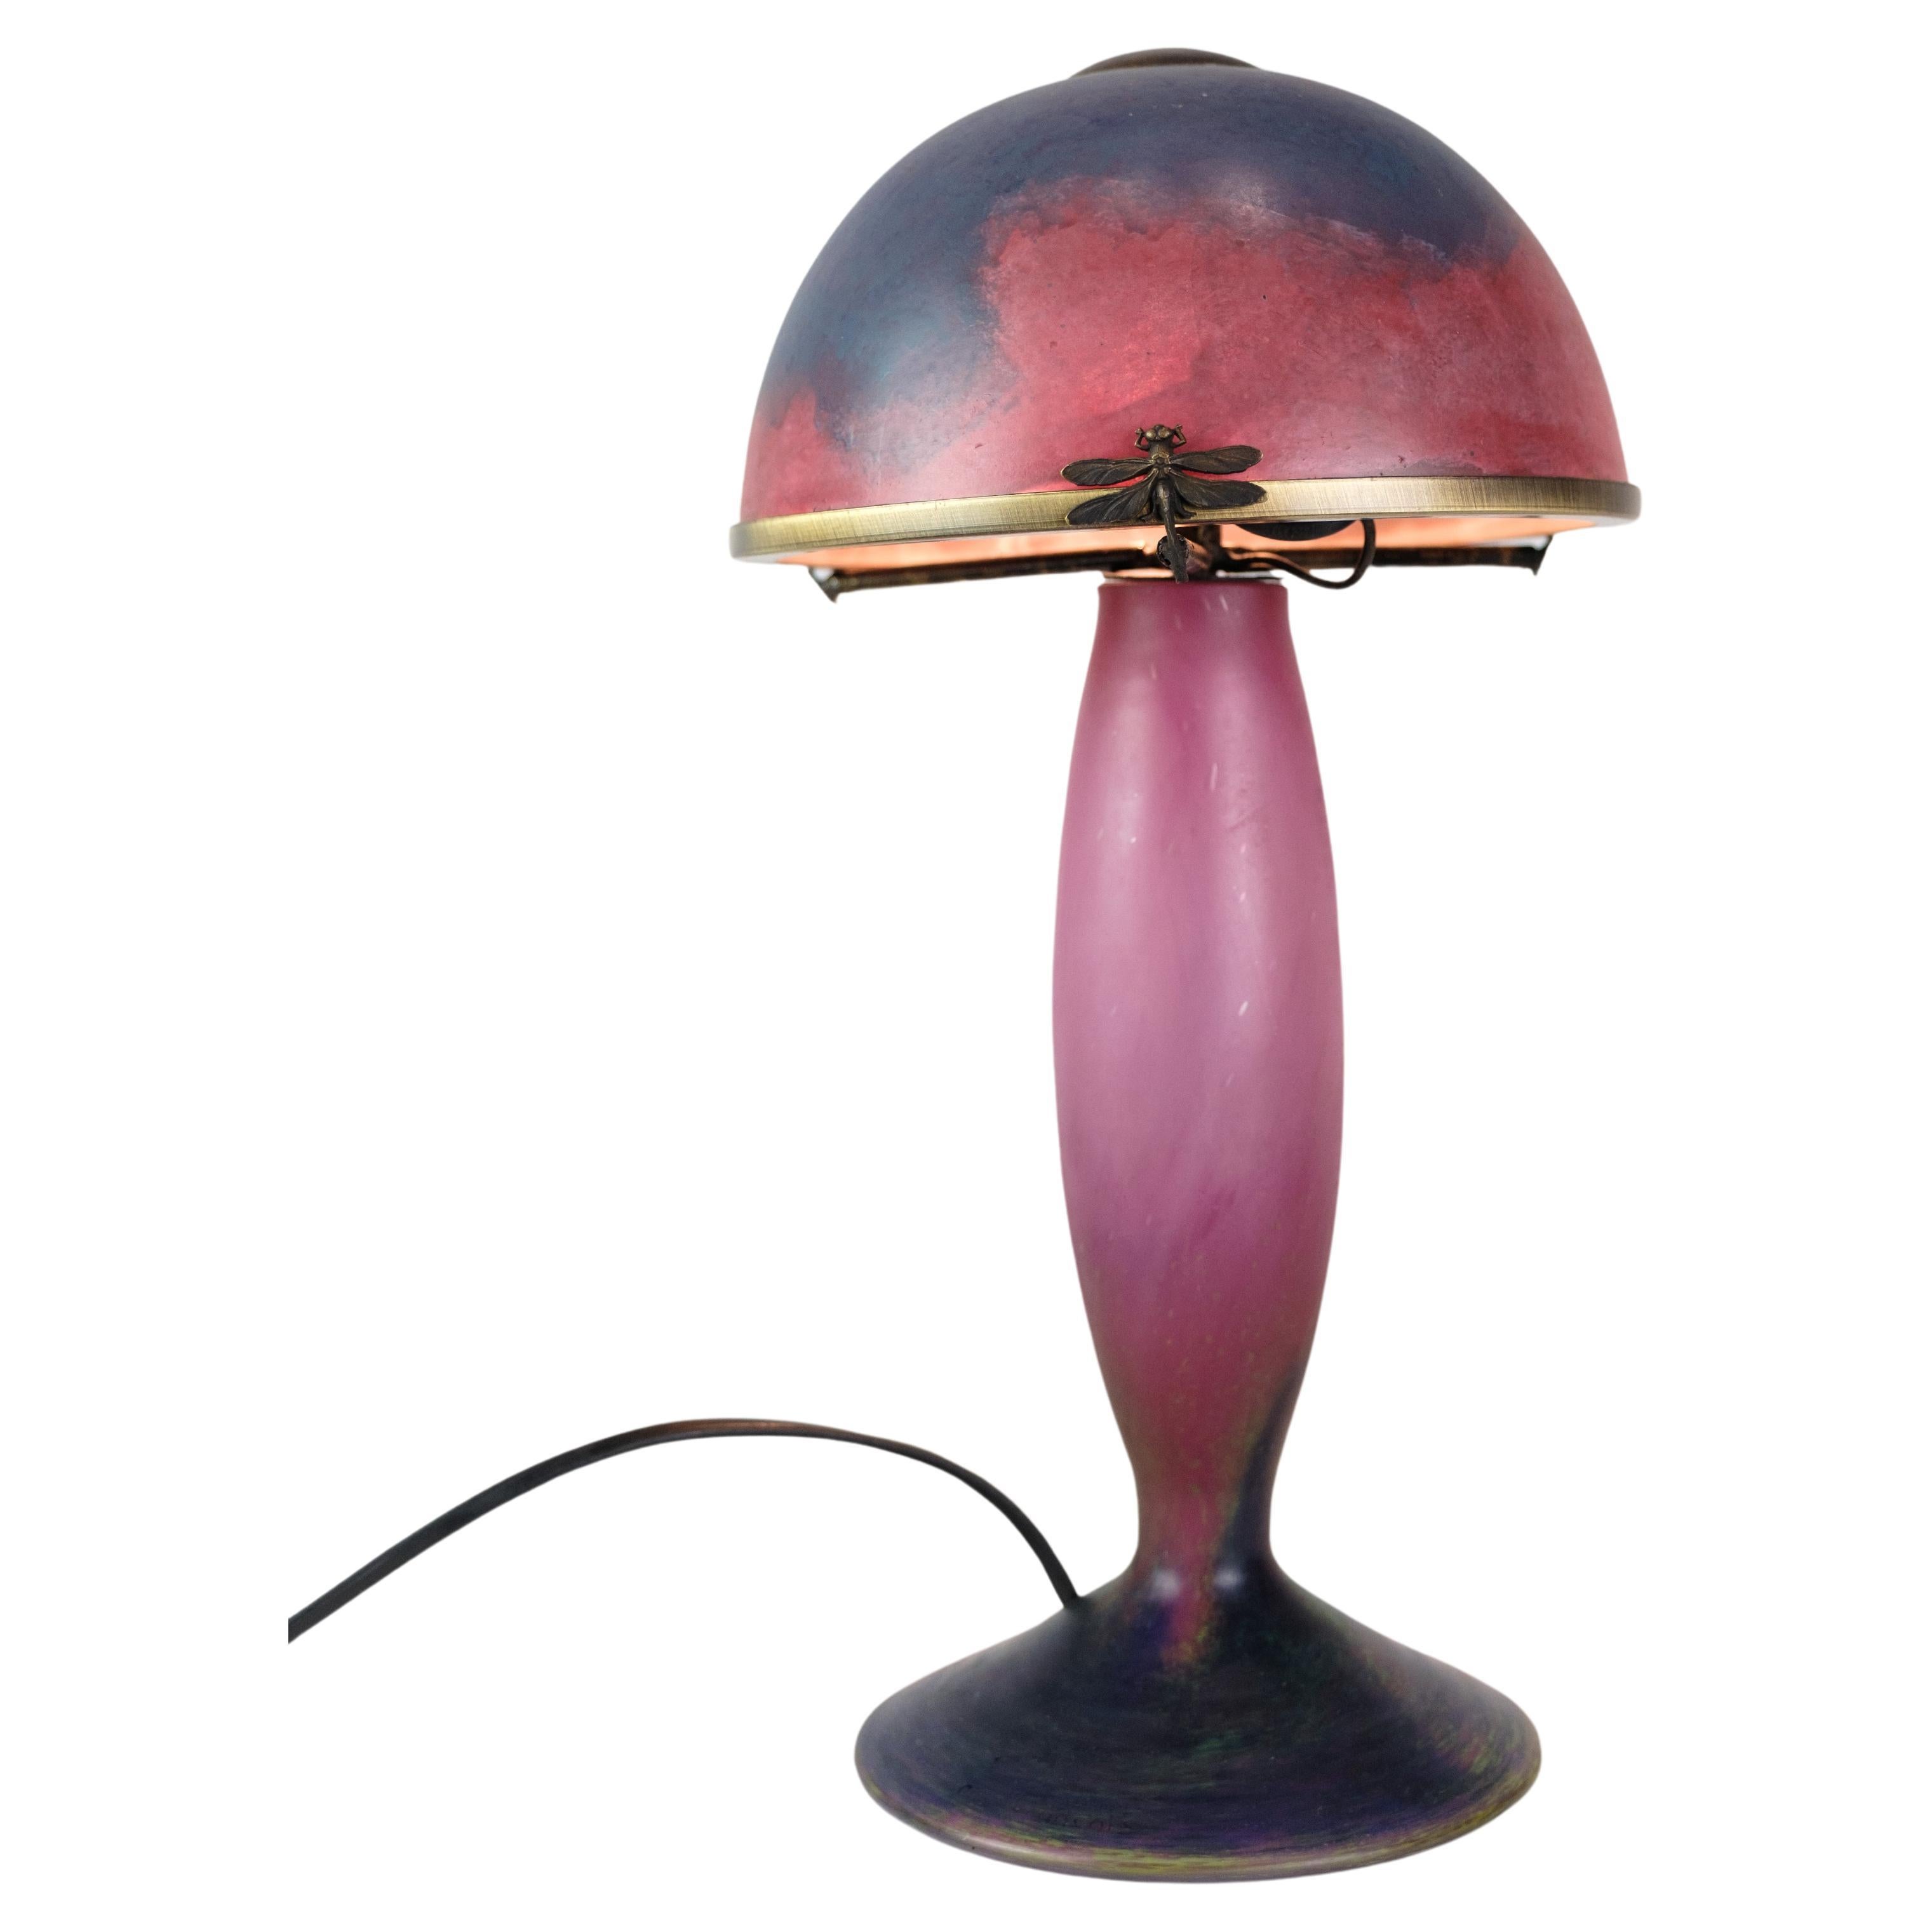 French Table Lamp in Dark Purple and Bordeaux Colors, Le Verre Francais, 1920s